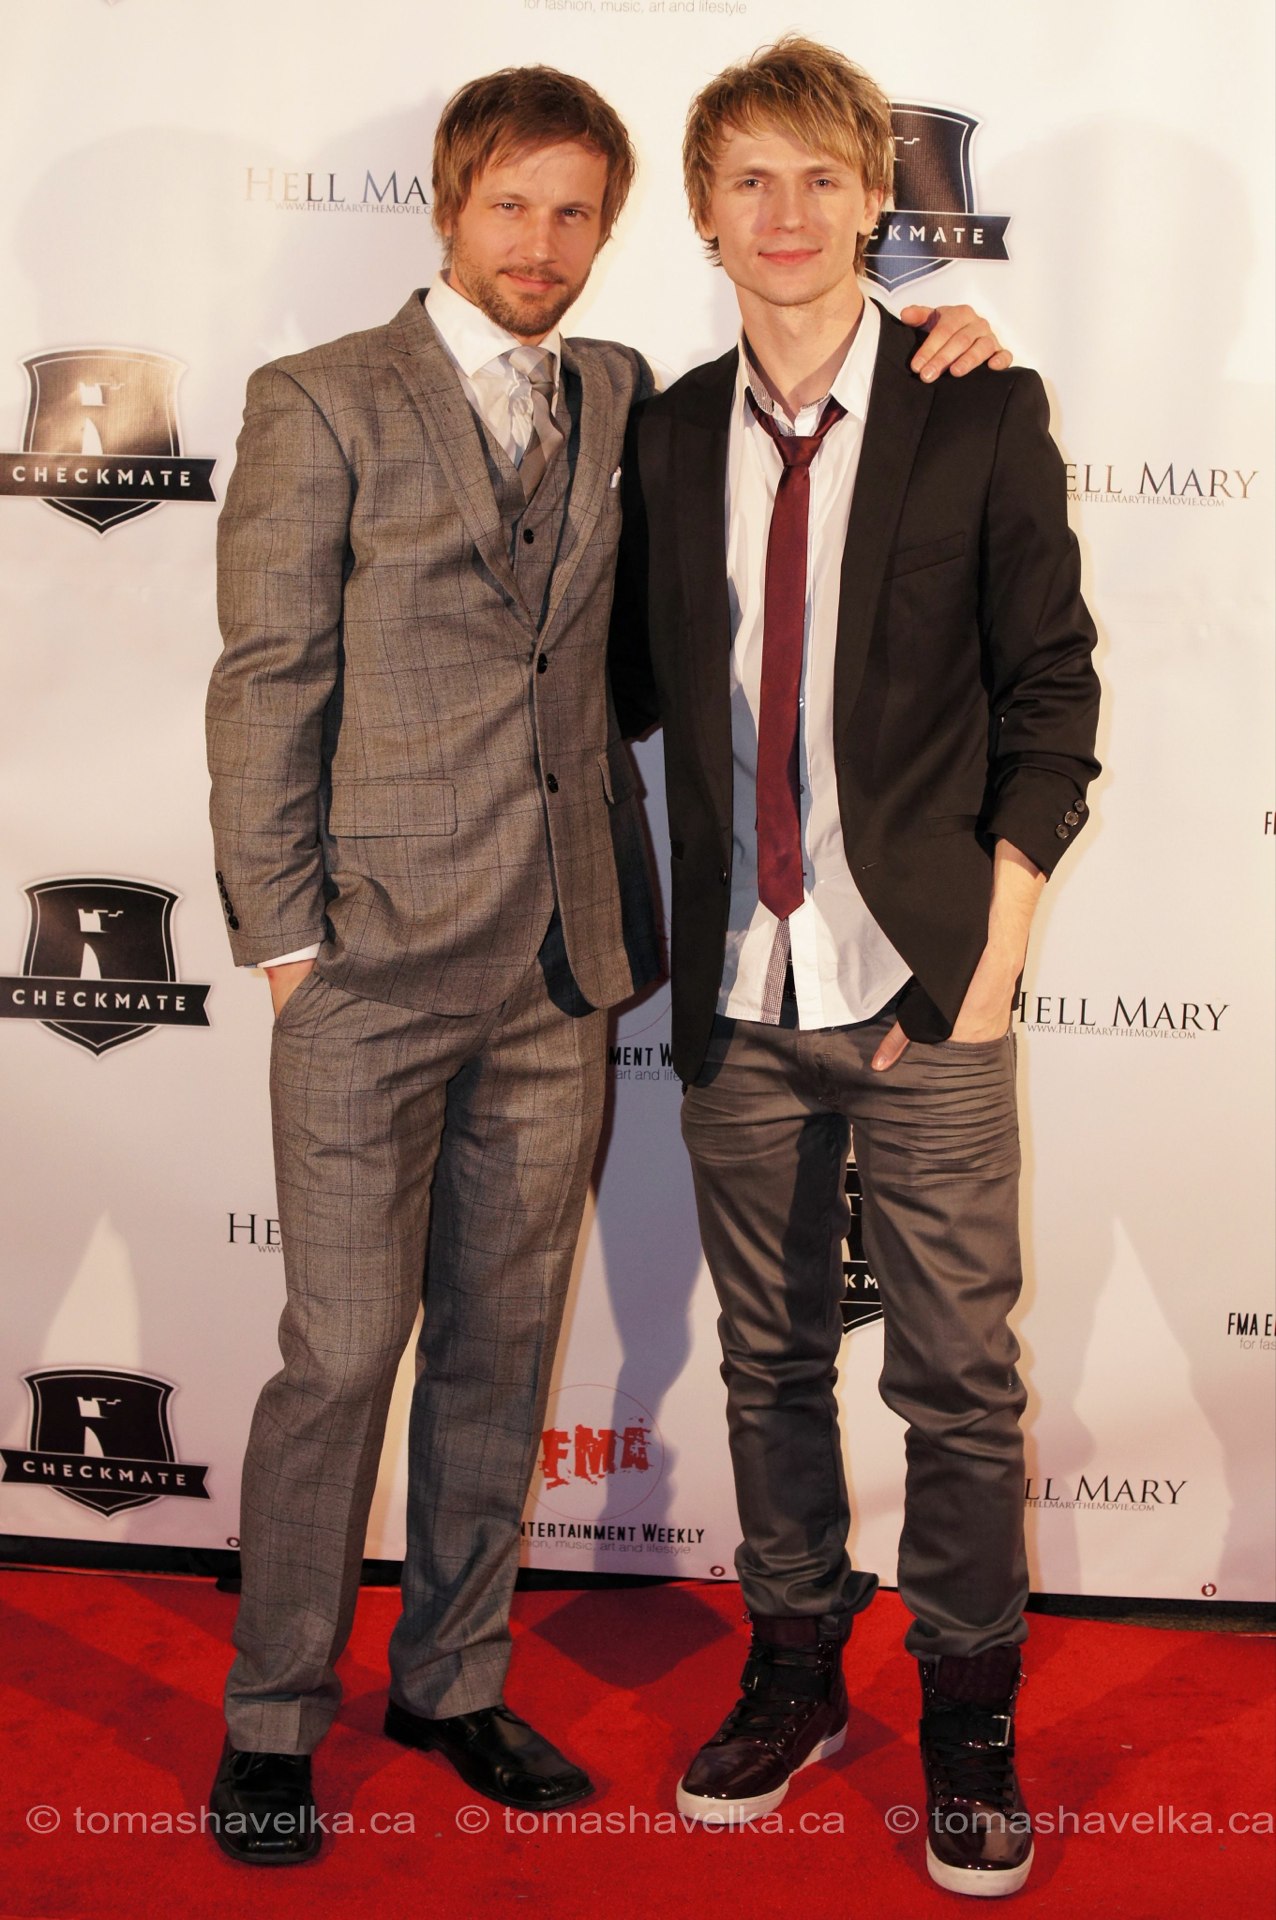 Checkmate Films Party with Chad Rook